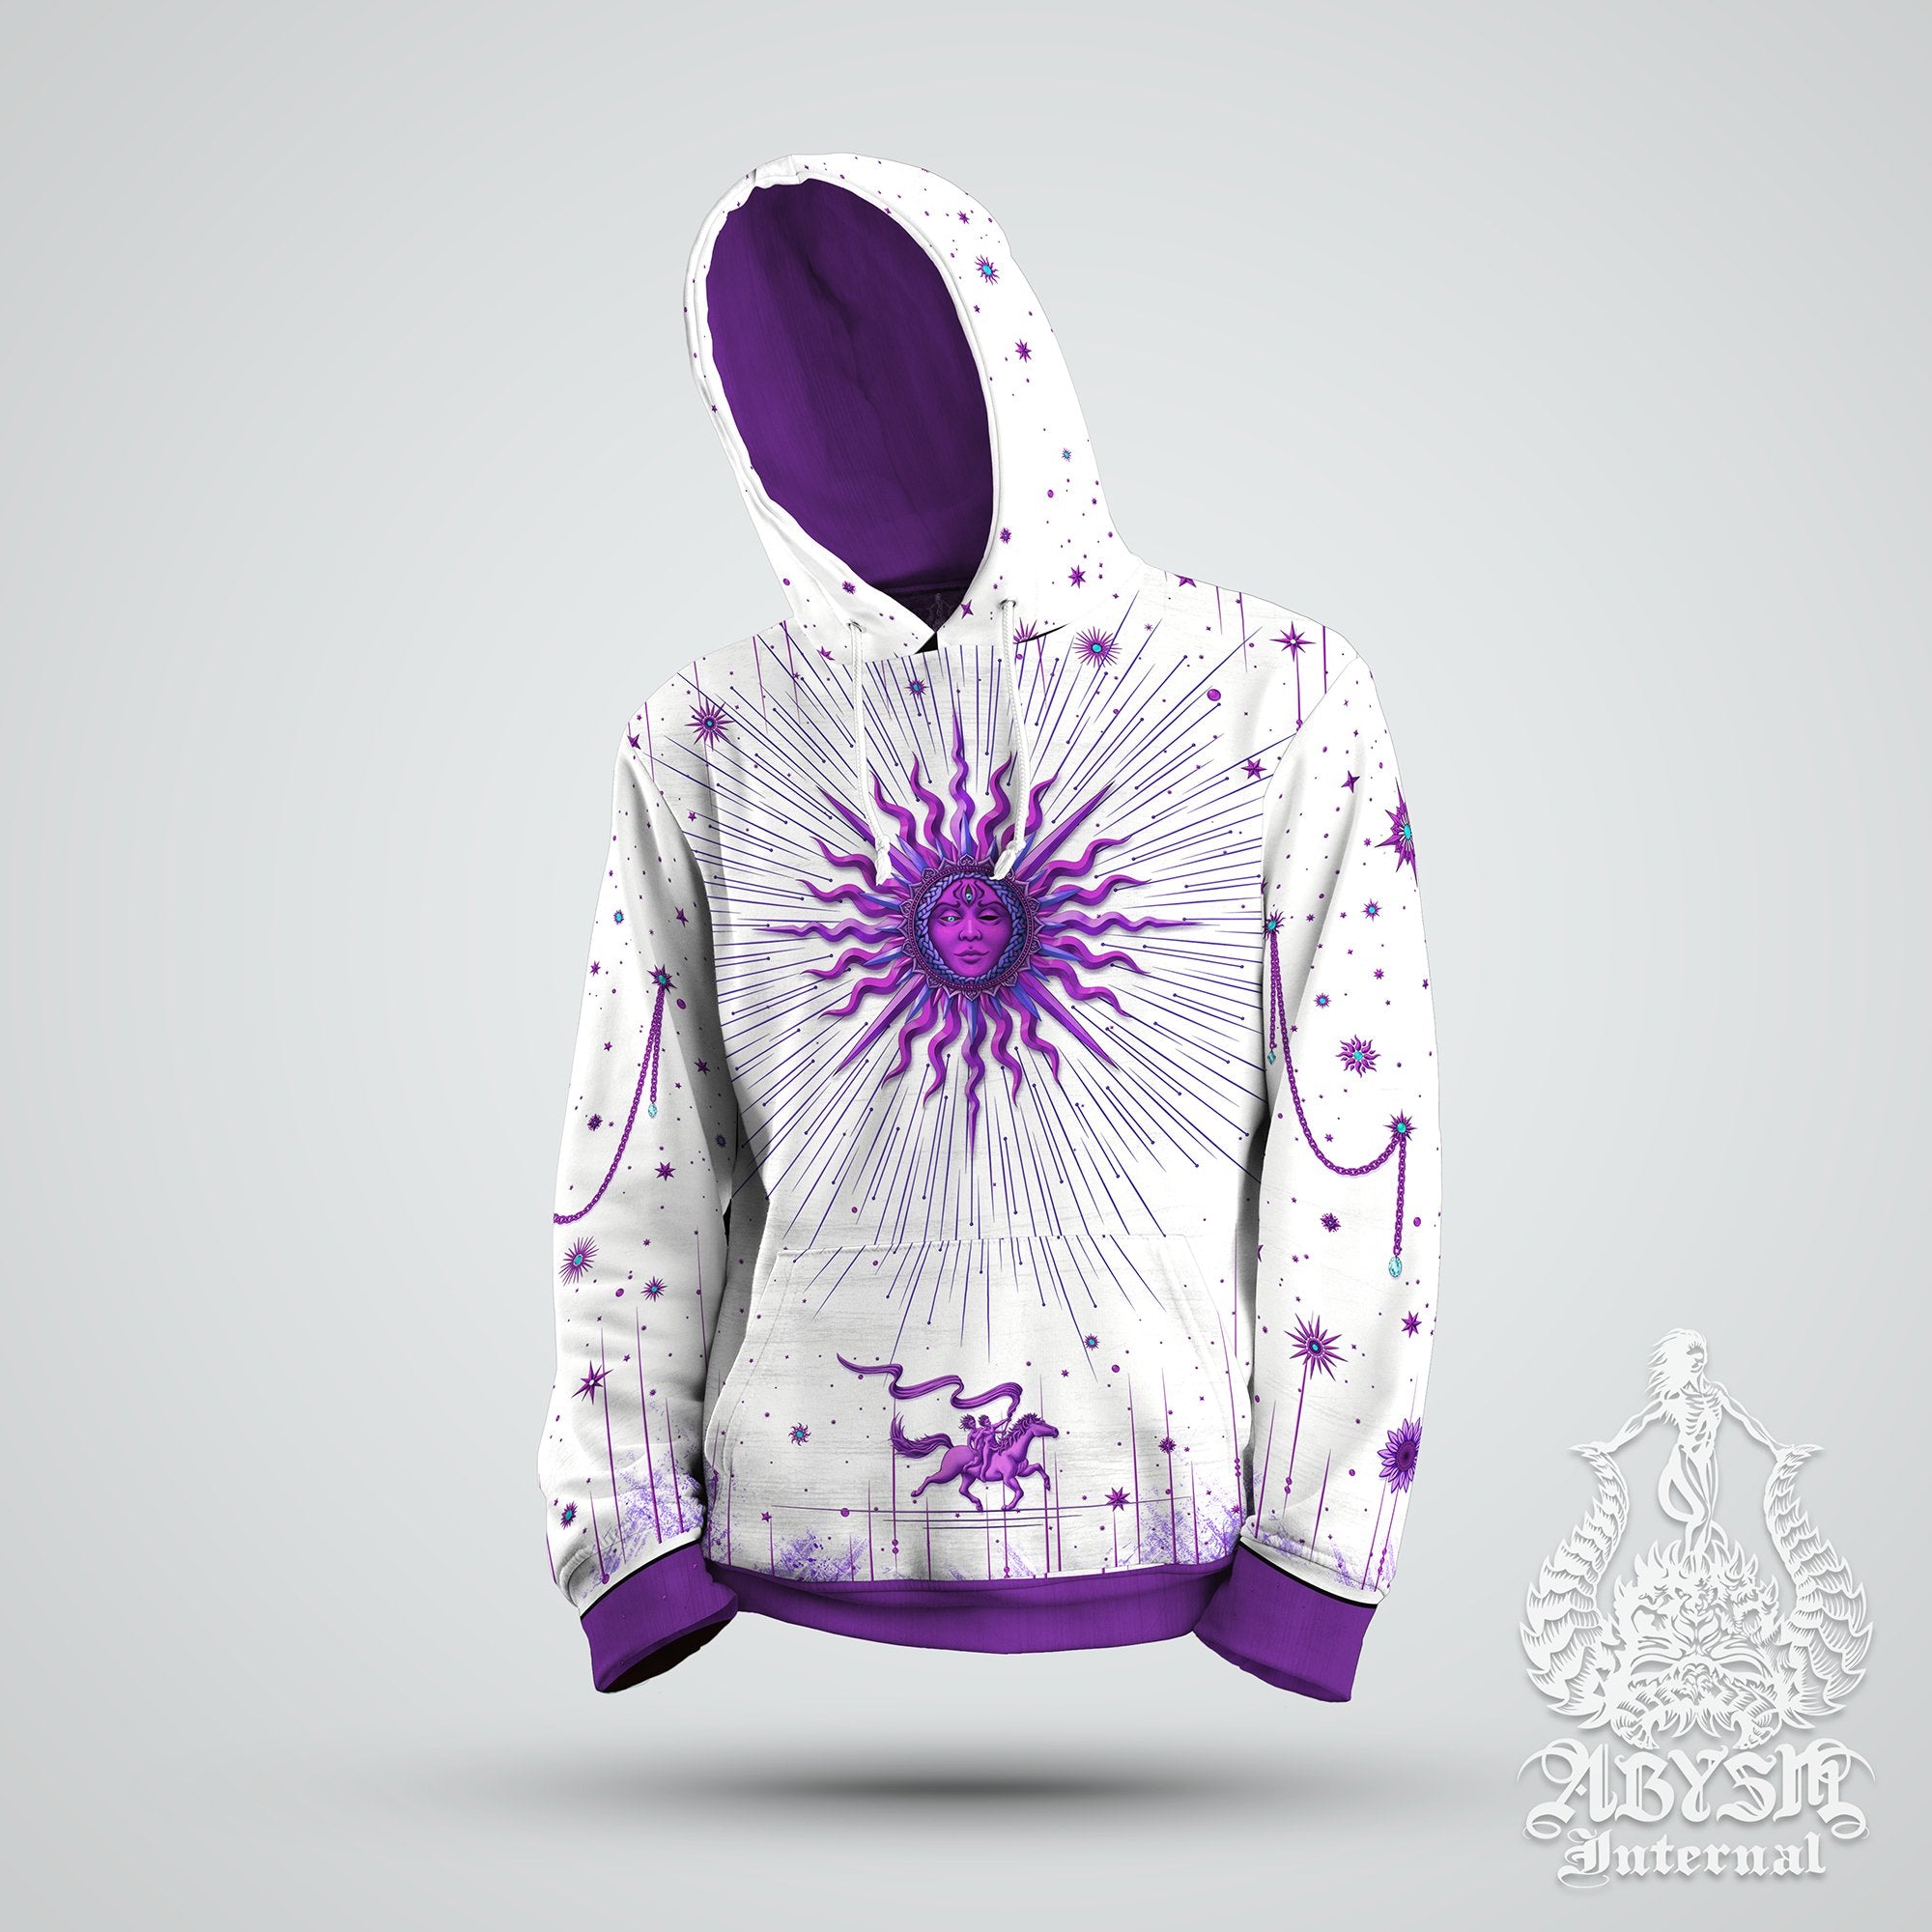 Witchy Sun Hoodie, Witch Outfit, Tarot Arcana Sweater, White Goth Pullover, Magic Street Festival, Purple Streetwear, Alternative Clothing, Unisex - Abysm Internal